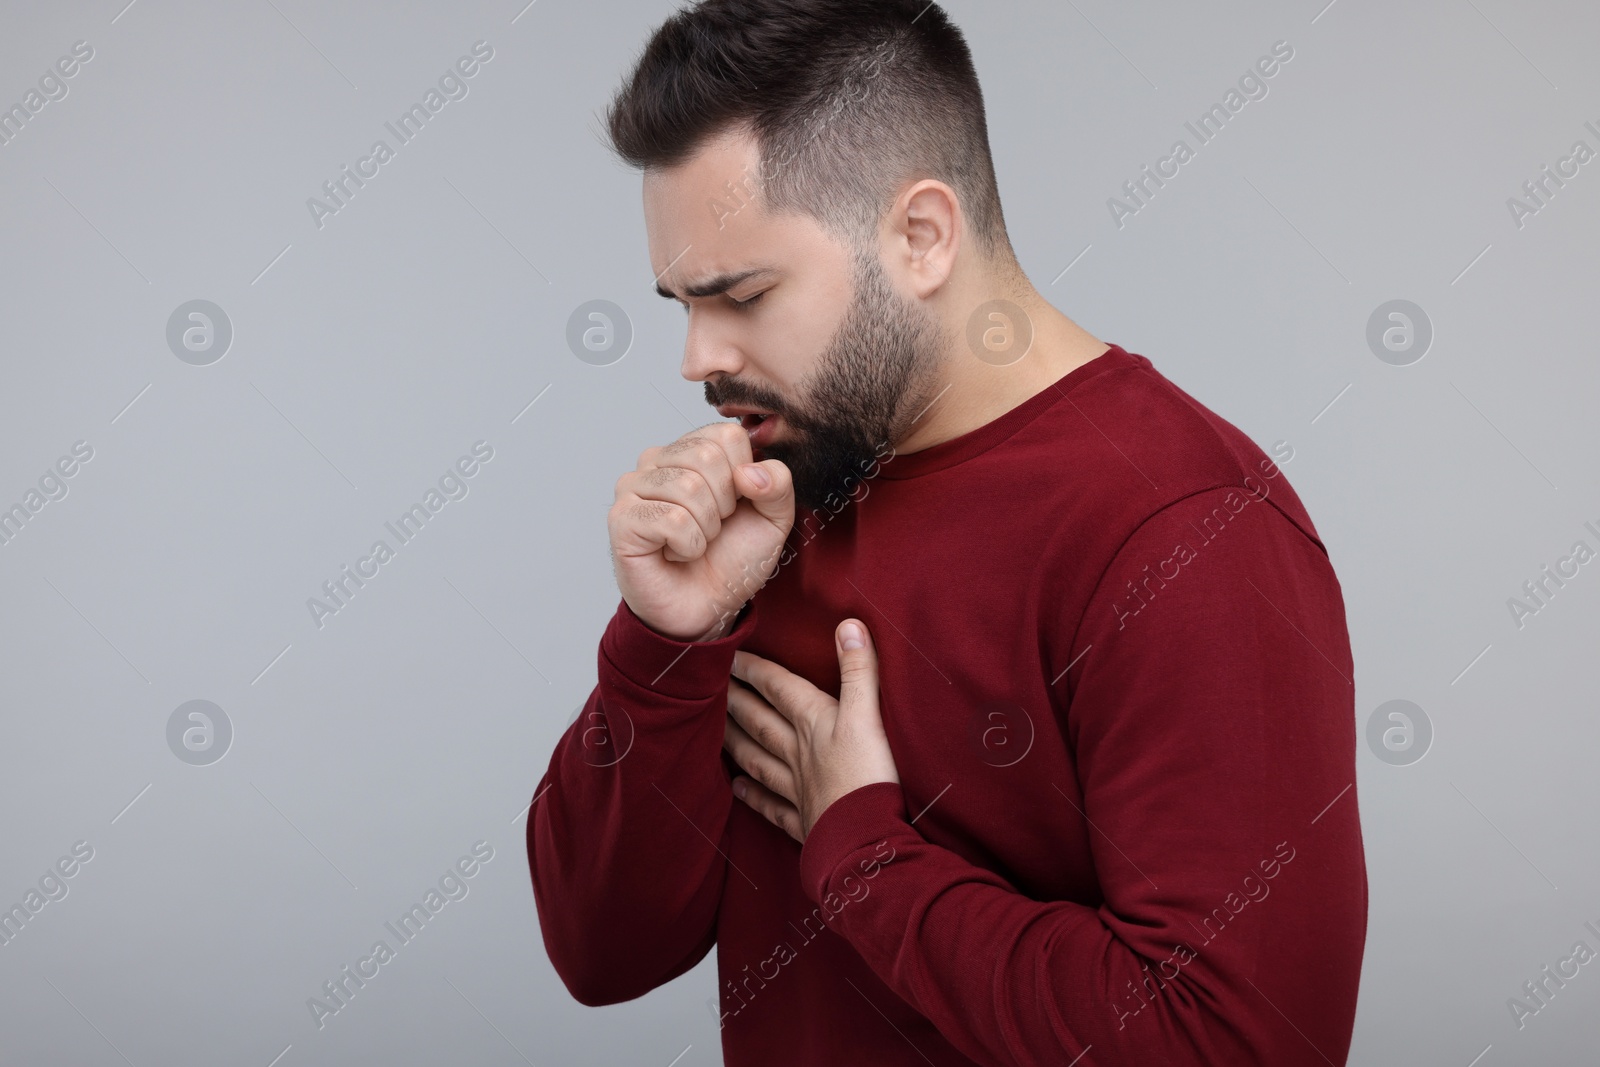 Photo of Sick man coughing on gray background, space for text